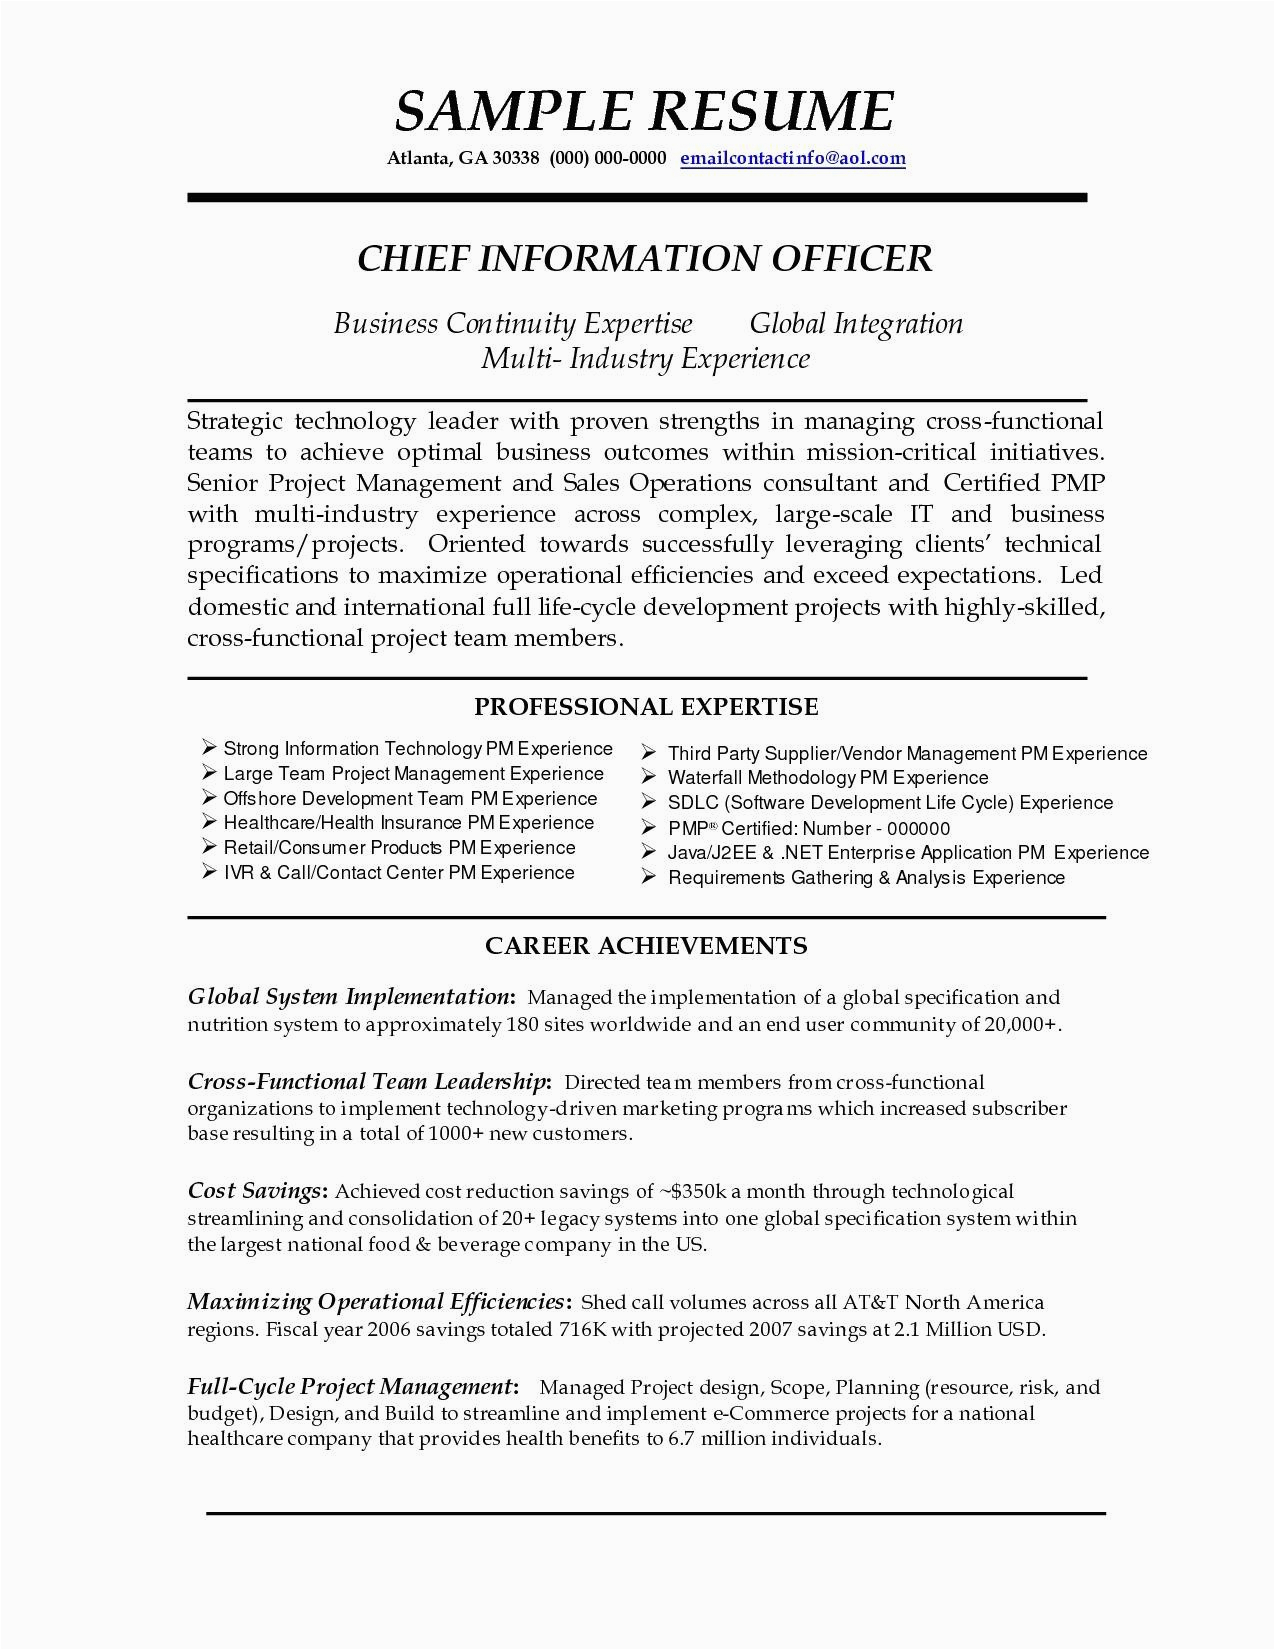 Sample Resume Summary Statements About Experience A Good Resume Summary Mryn ism